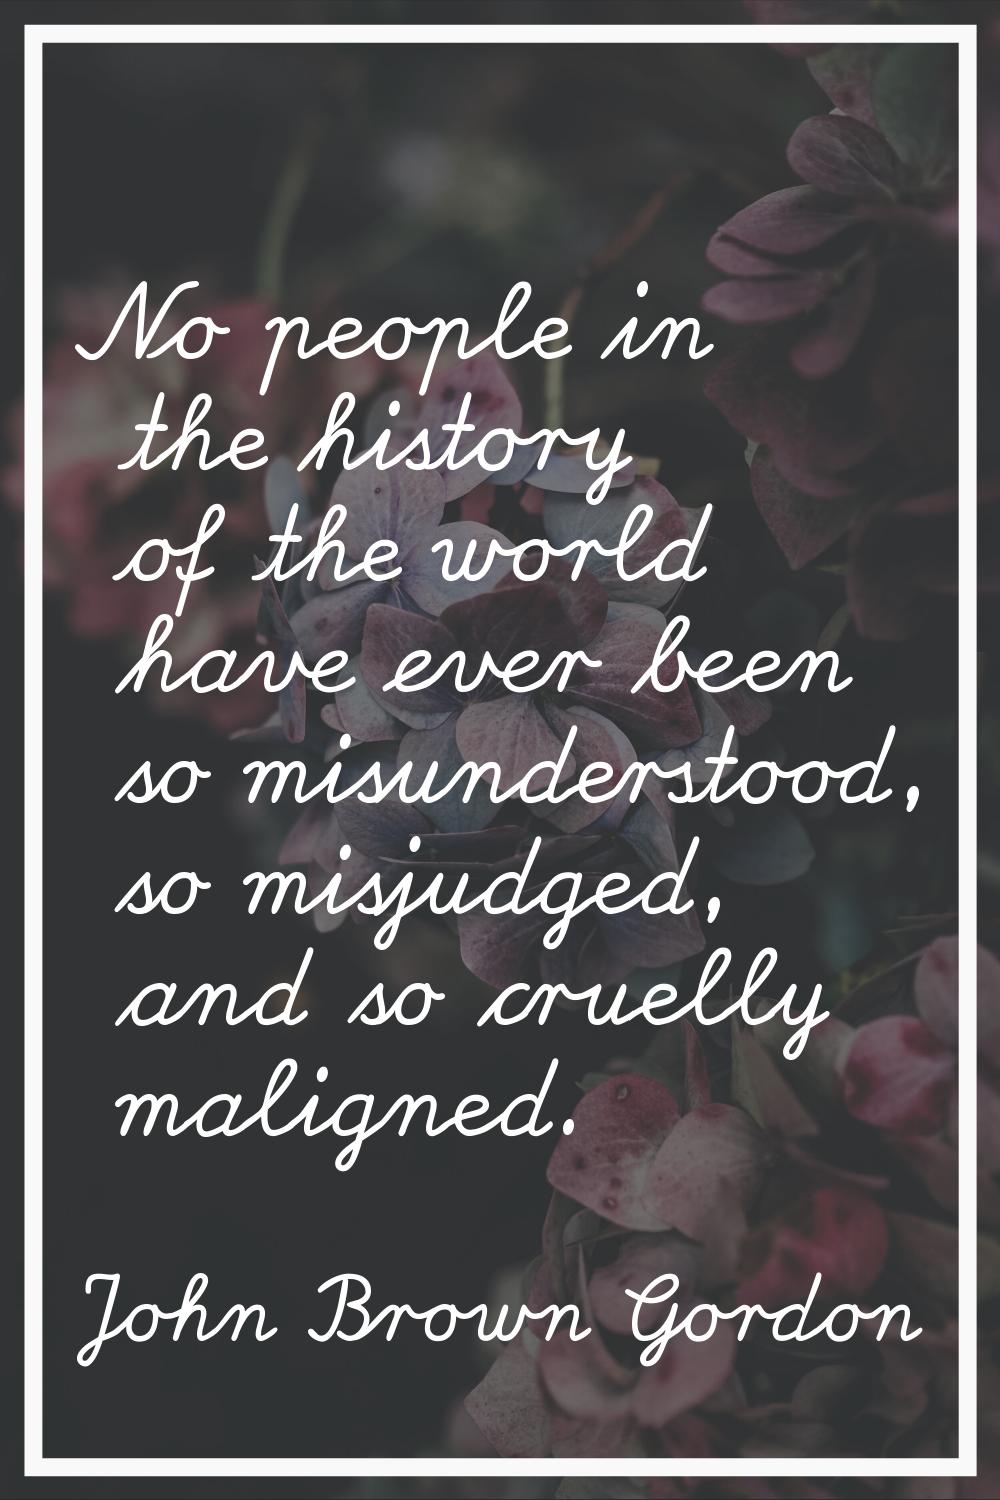 No people in the history of the world have ever been so misunderstood, so misjudged, and so cruelly